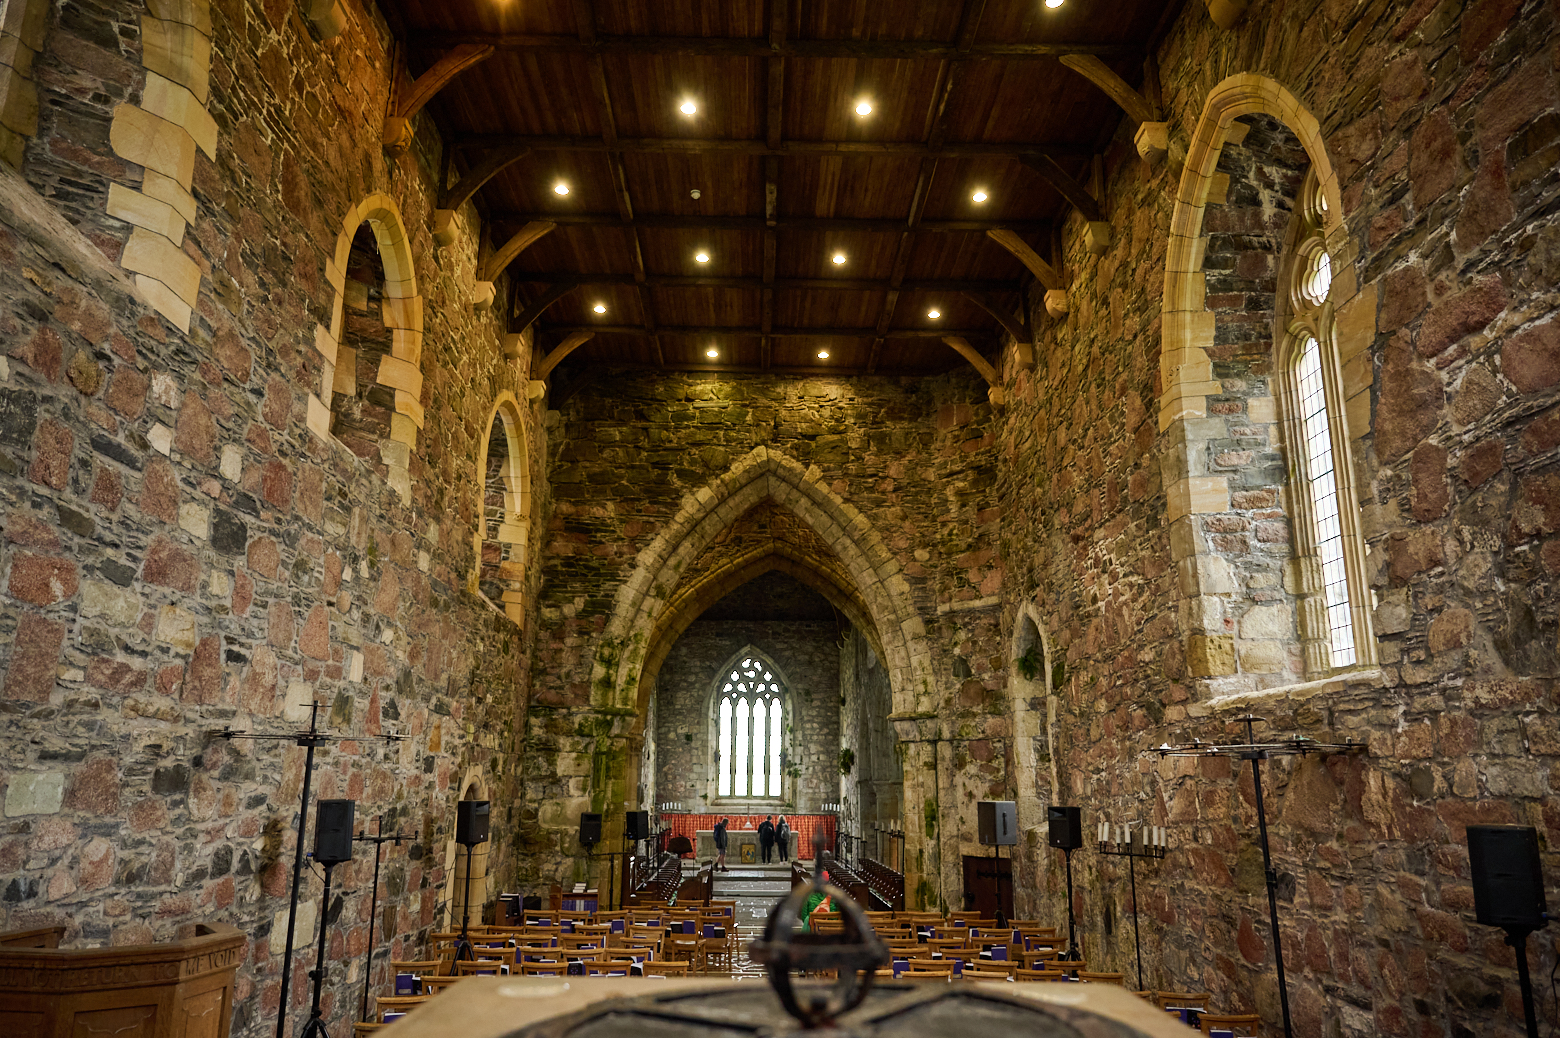 Visiting Iona Abbey on the Isle of Iona in the Inner Hebrides, Scotland